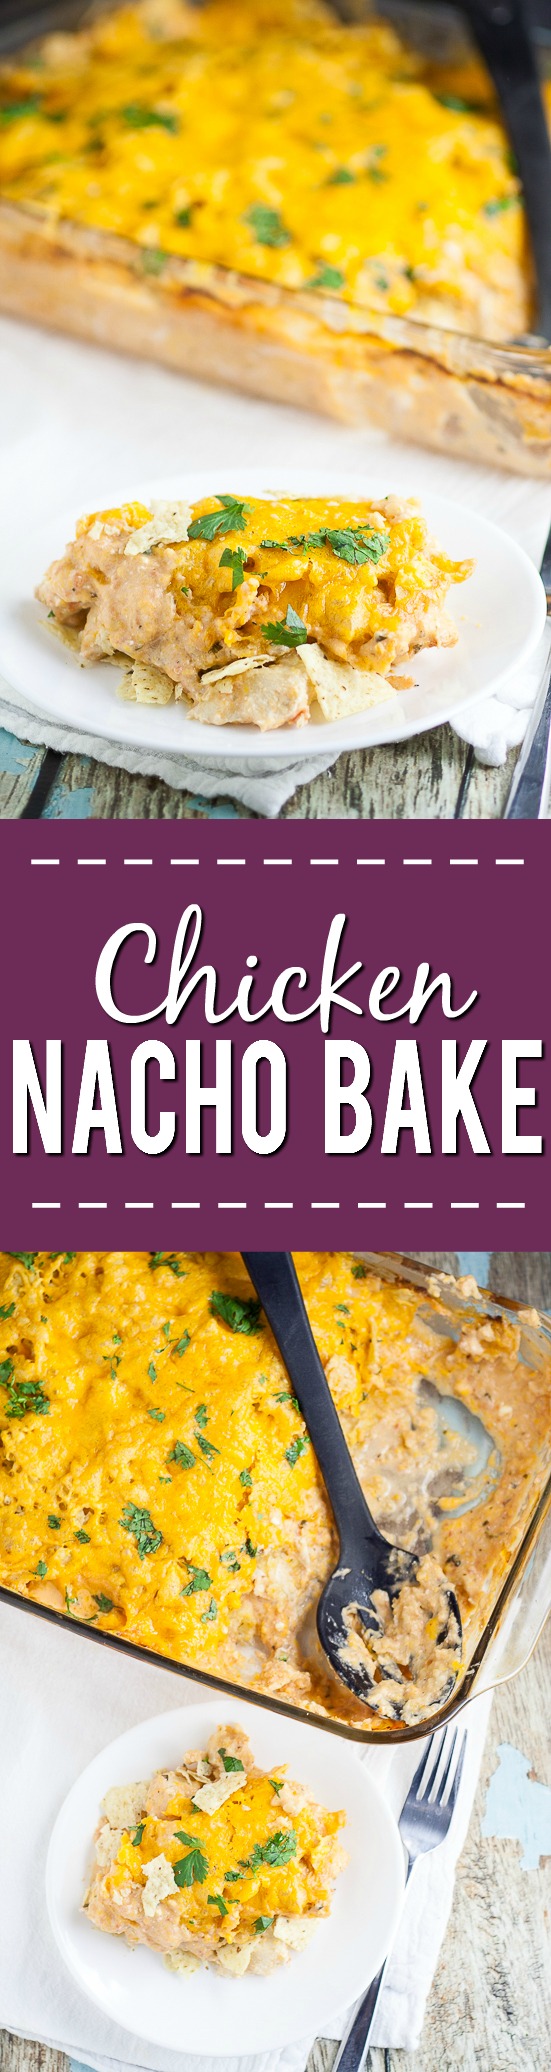 Chicken Nacho Bake Recipe - Creamy, crunchy, and cheesy, this Chicken Nacho Bake recipe is a crowd-pleasing easy casserole recipe with just 5 ingredients.  Cheesy, quick and easy family dinner recipe with chicken breast.